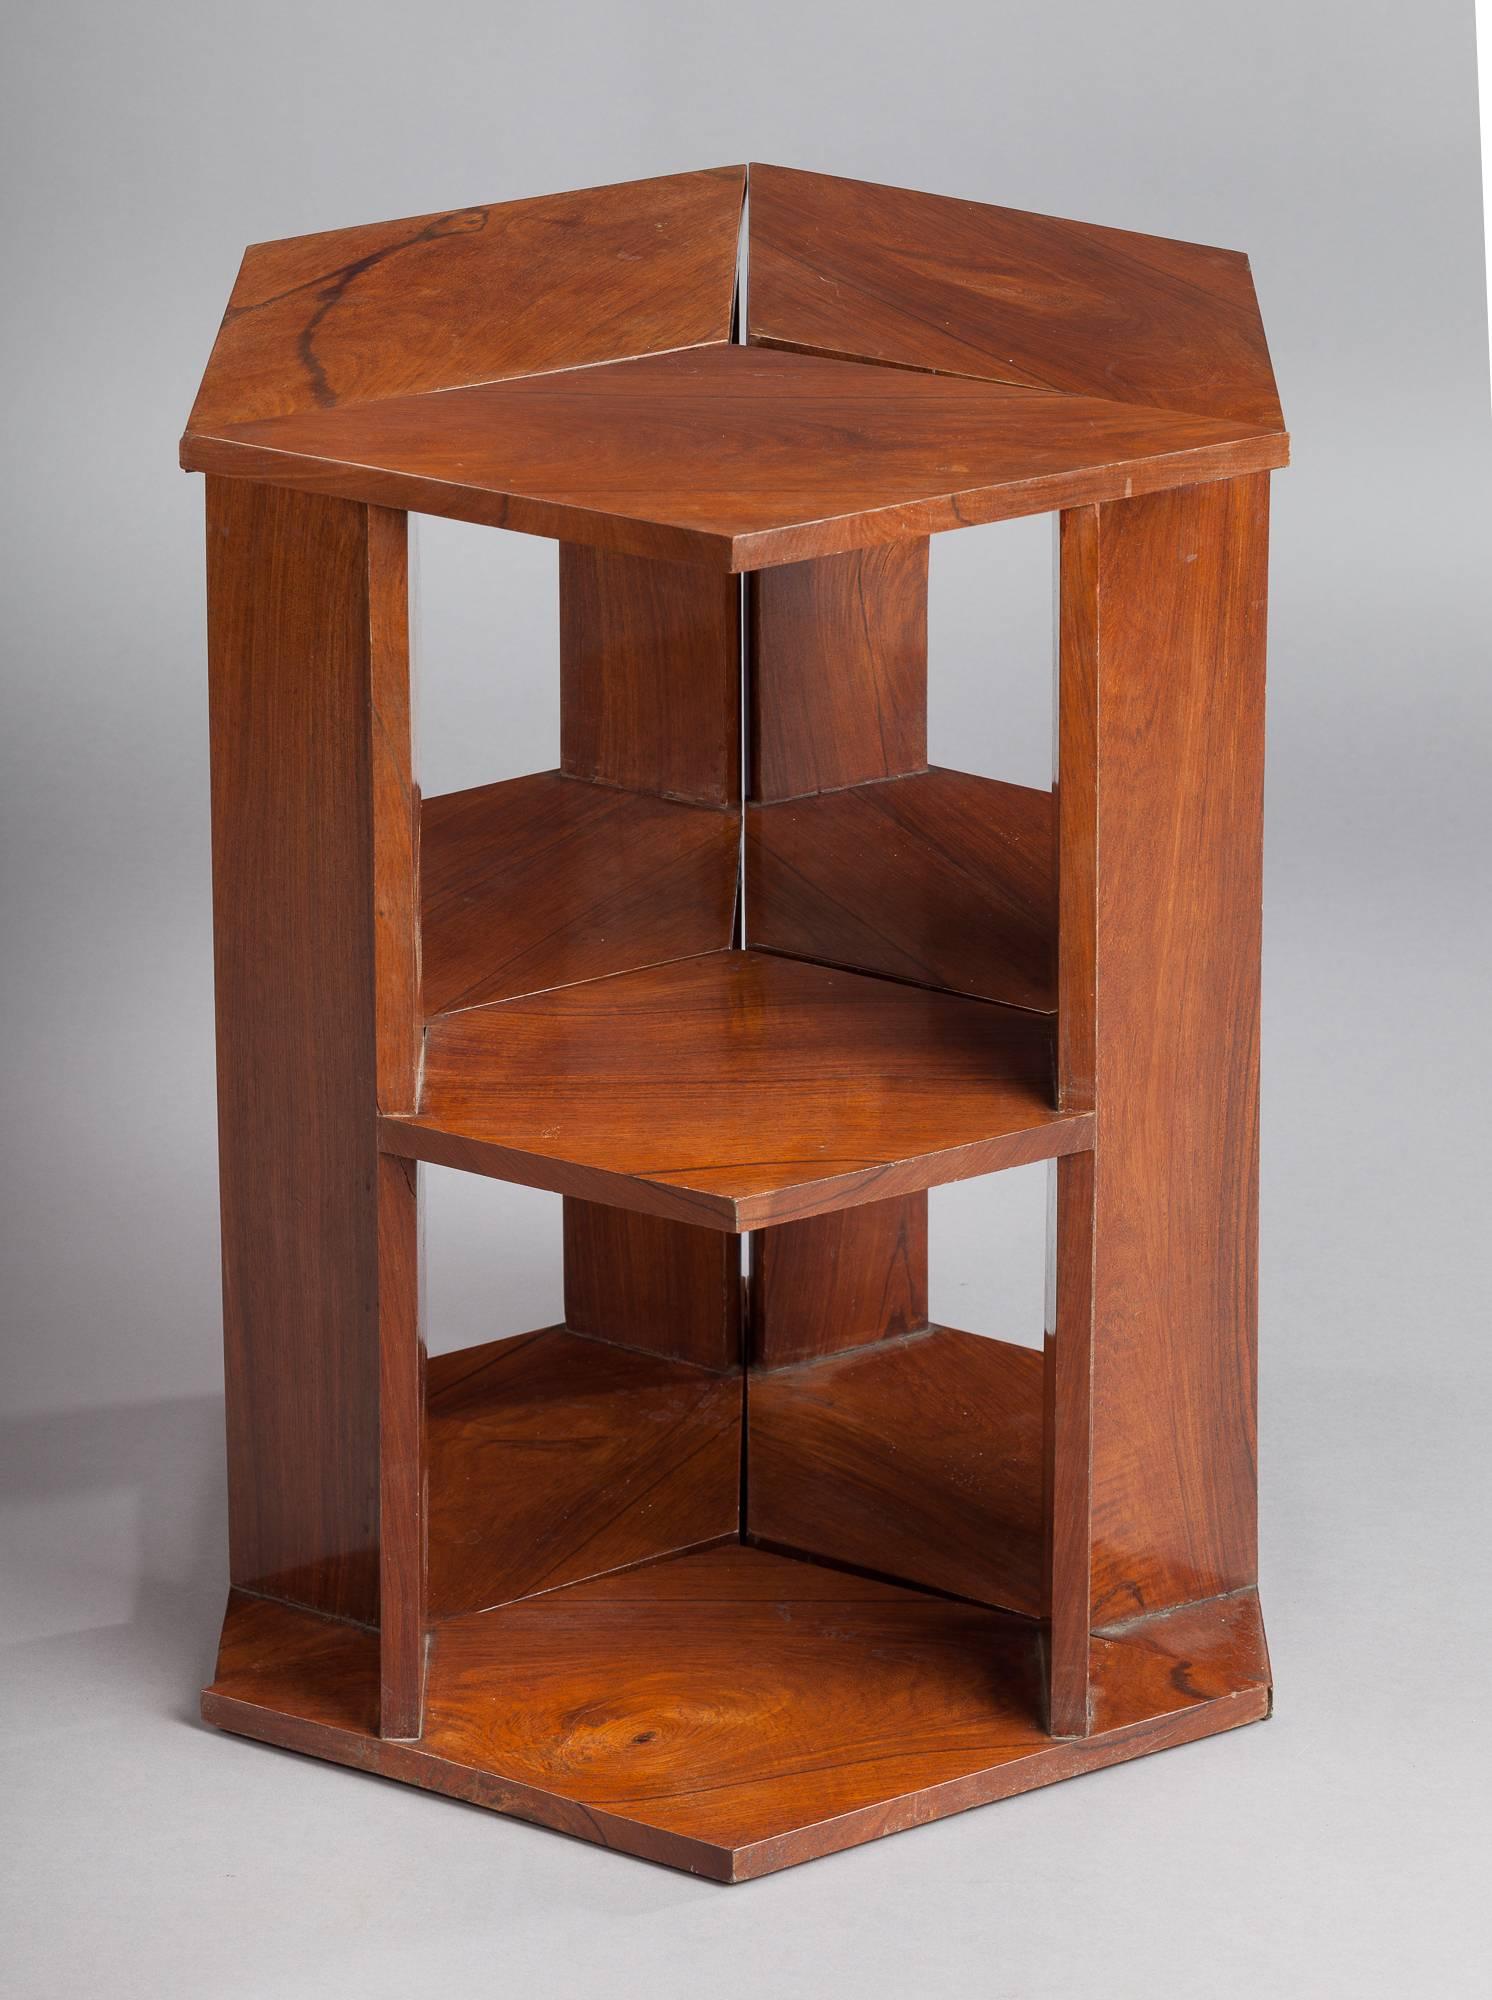 Three quadrangle side tables in cheerywood tree could forming the hexagon table or can be used separately in the manner of Eugene Printz.